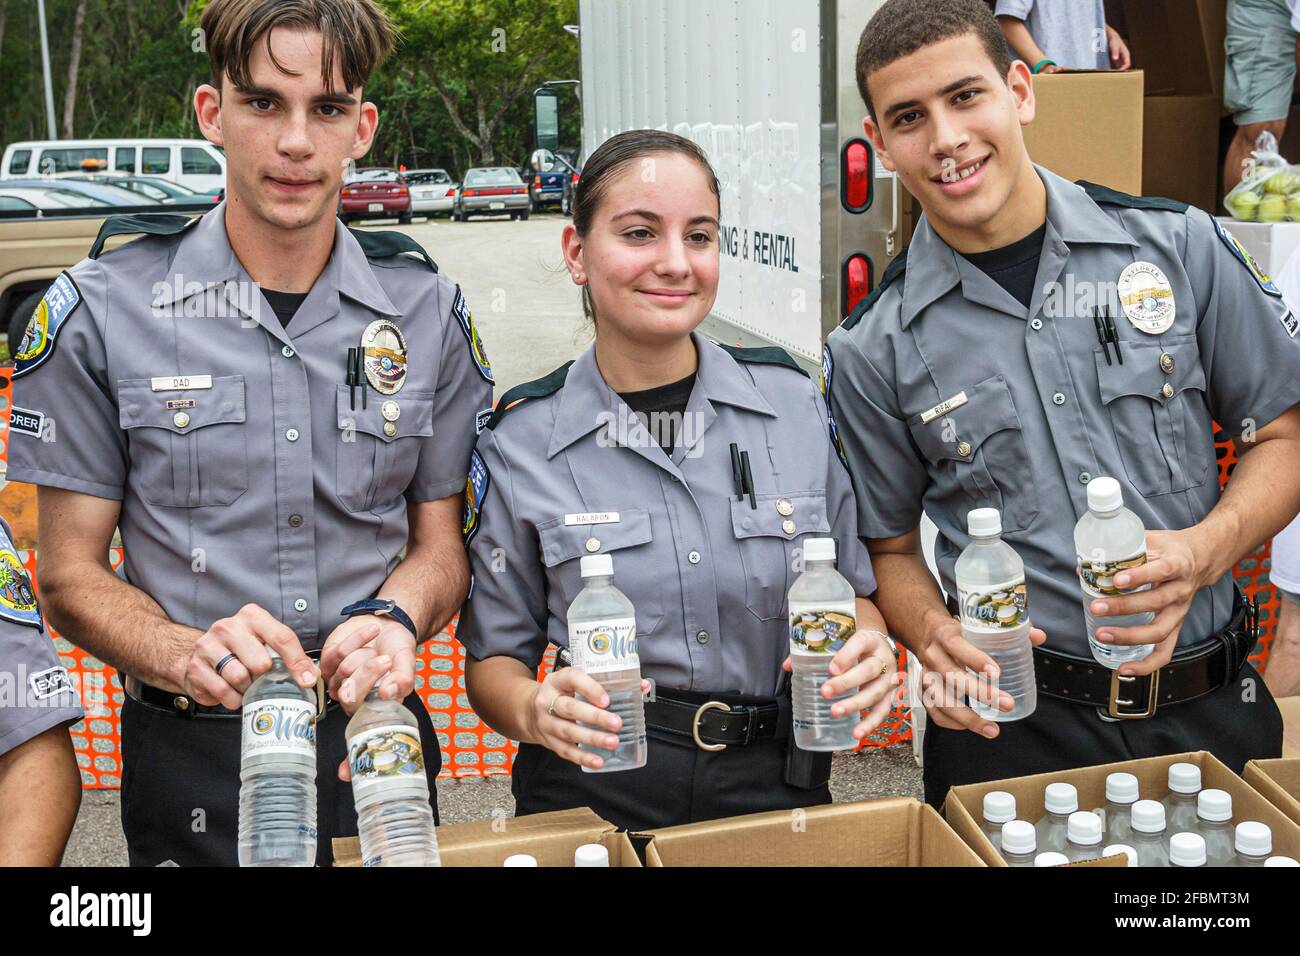 Florida North Miami FIU campus Special Olympics Summer Games,volunteers police Explorers offering handing out free bottled water,Hispanic teen teenage Stock Photo